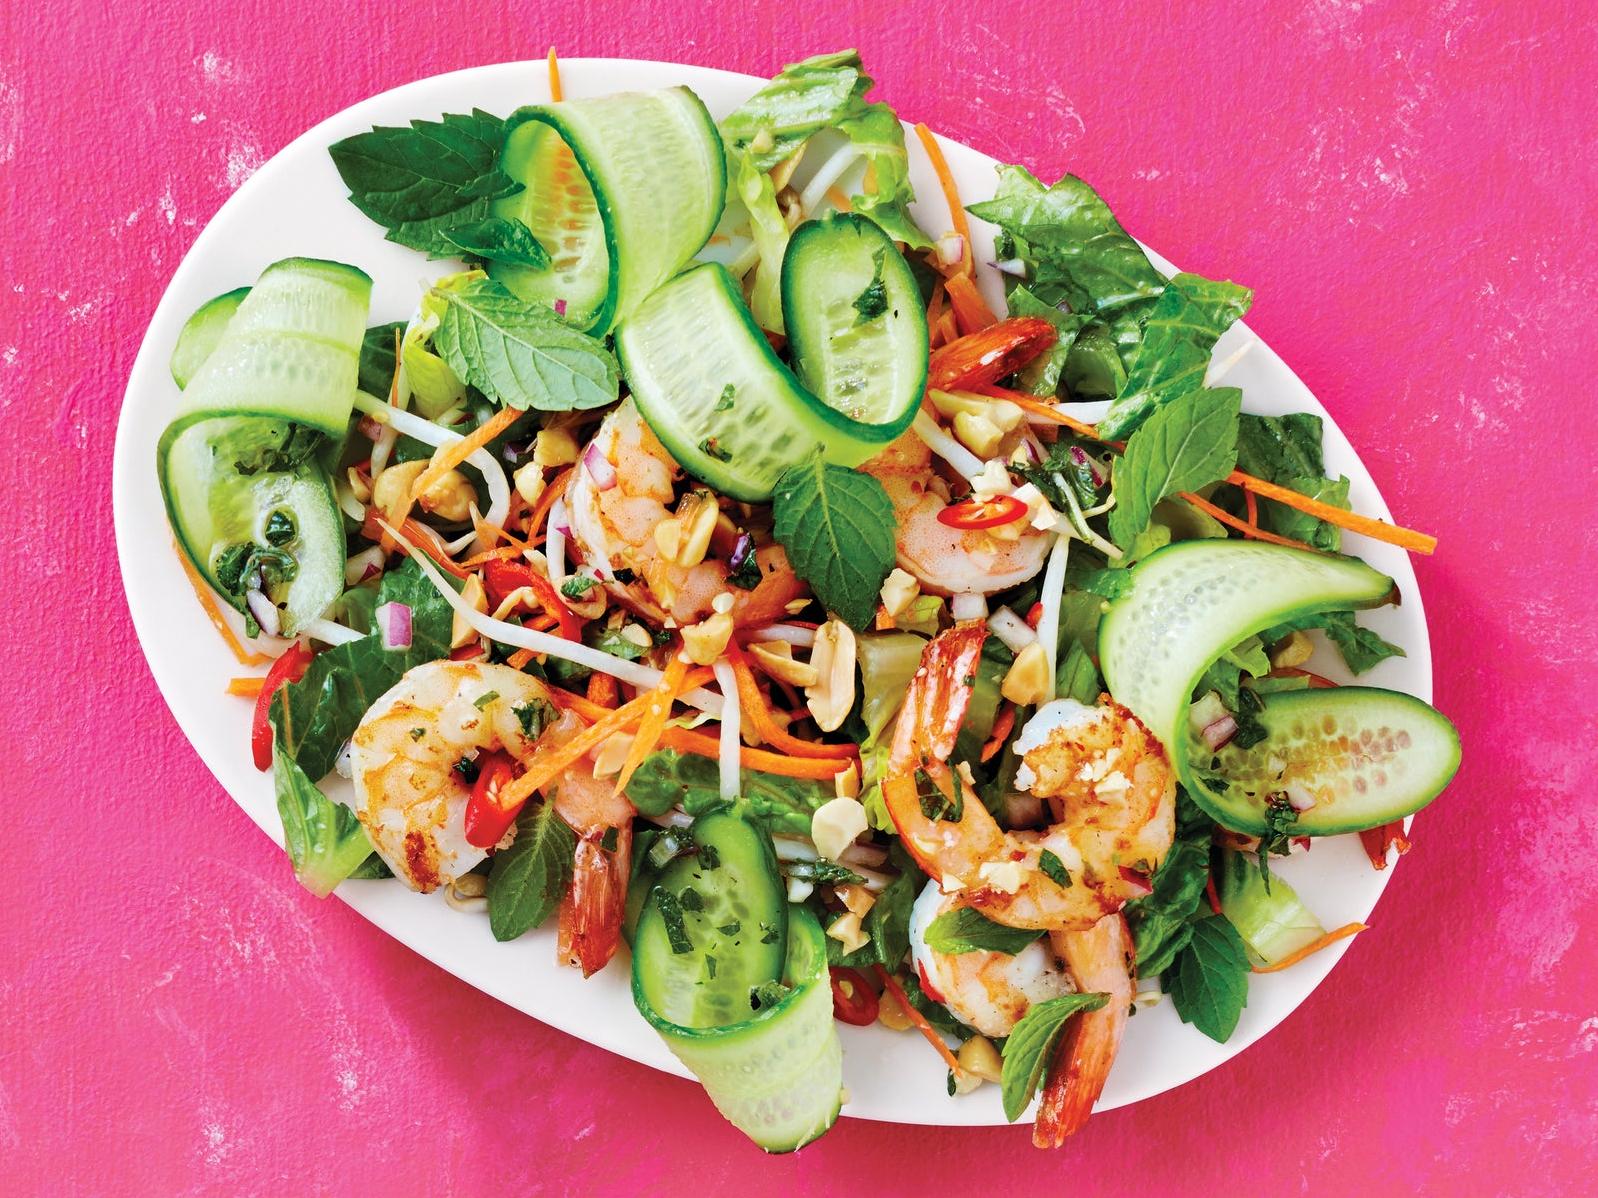  Quench your thirst and satisfy your cravings with this cool and refreshing salad!